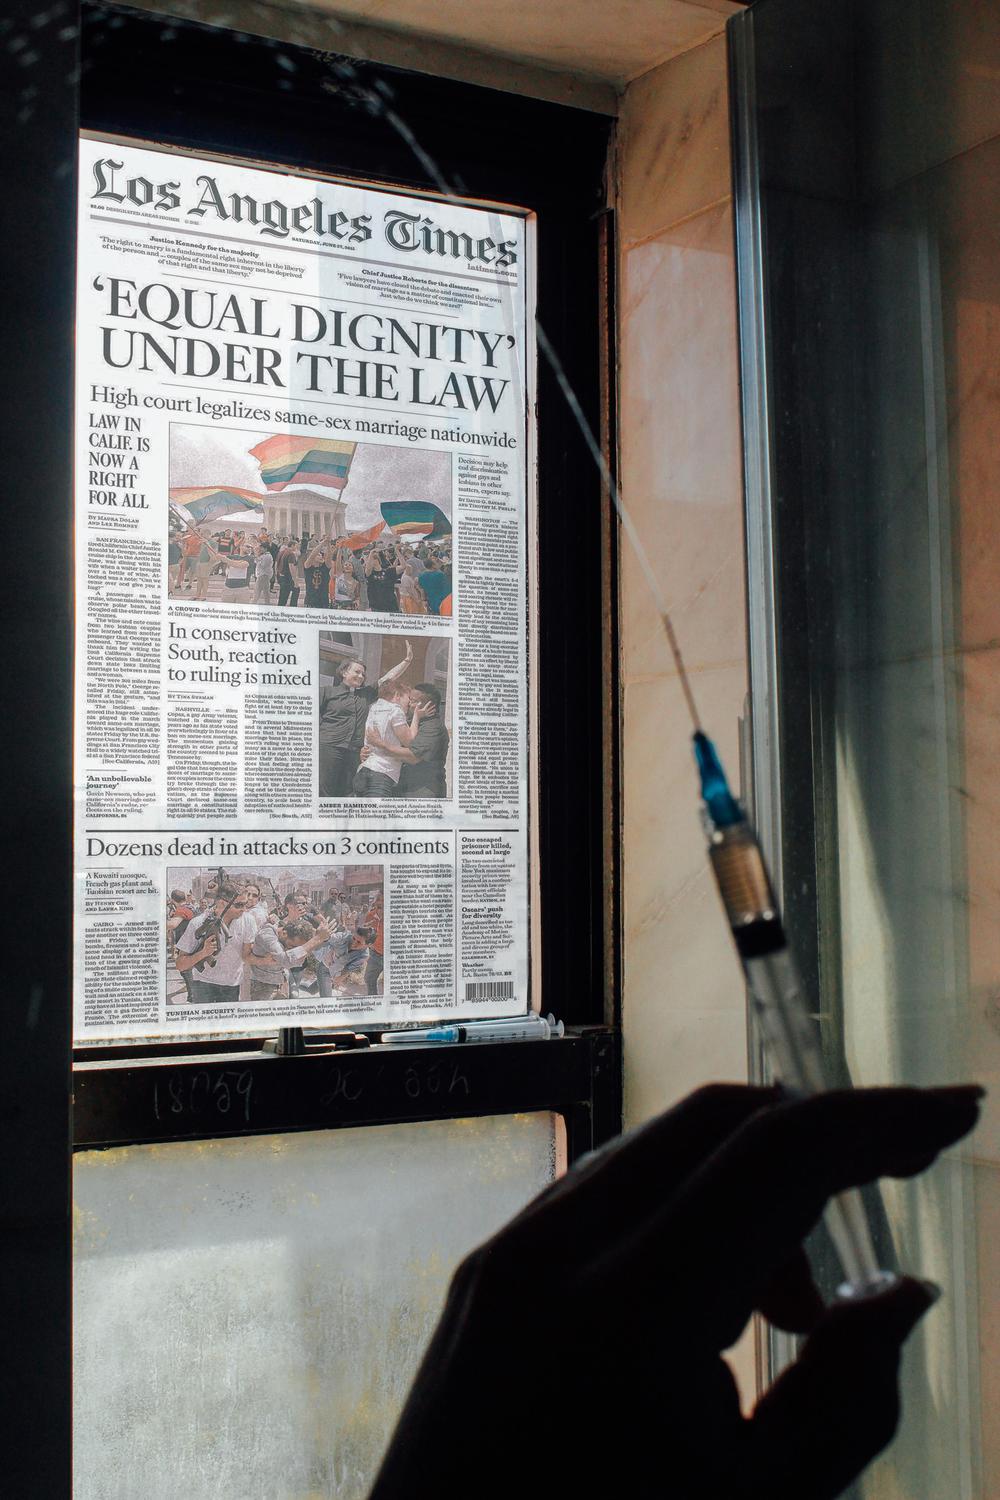 L.A. Times cover with headline for Equality Dignity Under the Law posted in a window with a person